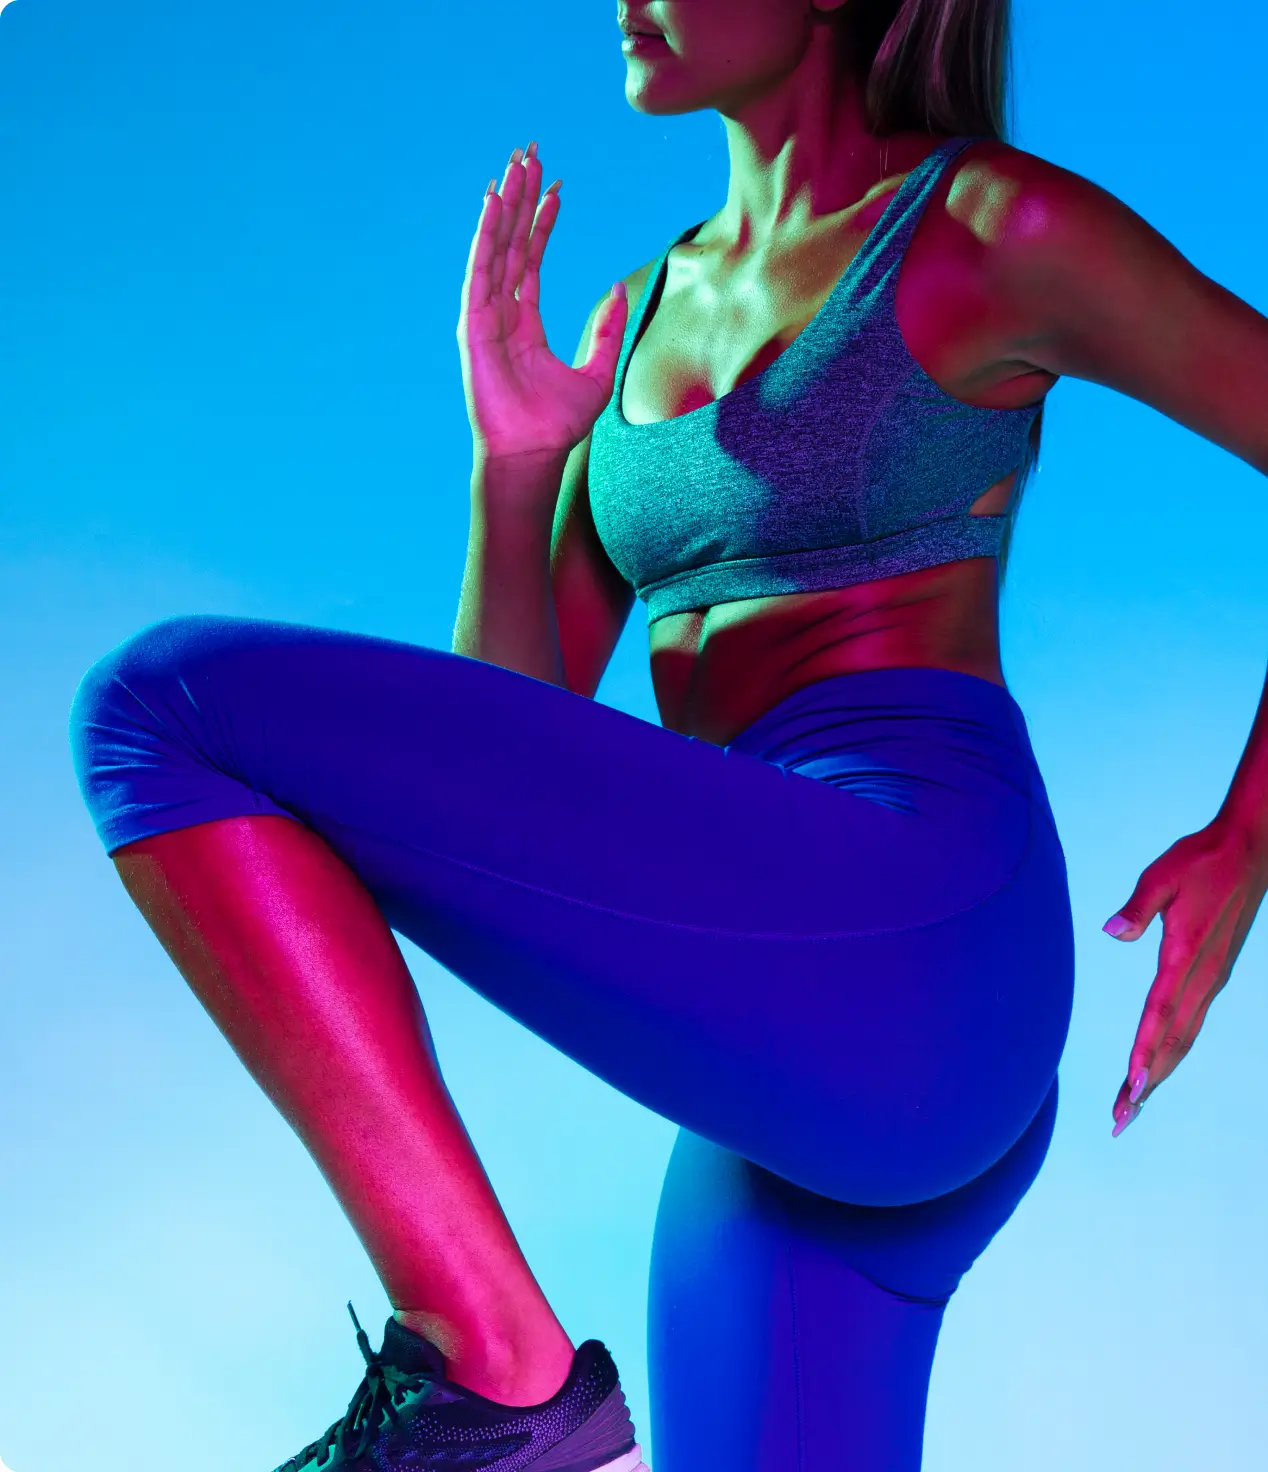 A woman in a blue sports bra doing a squat to improve her fitness.